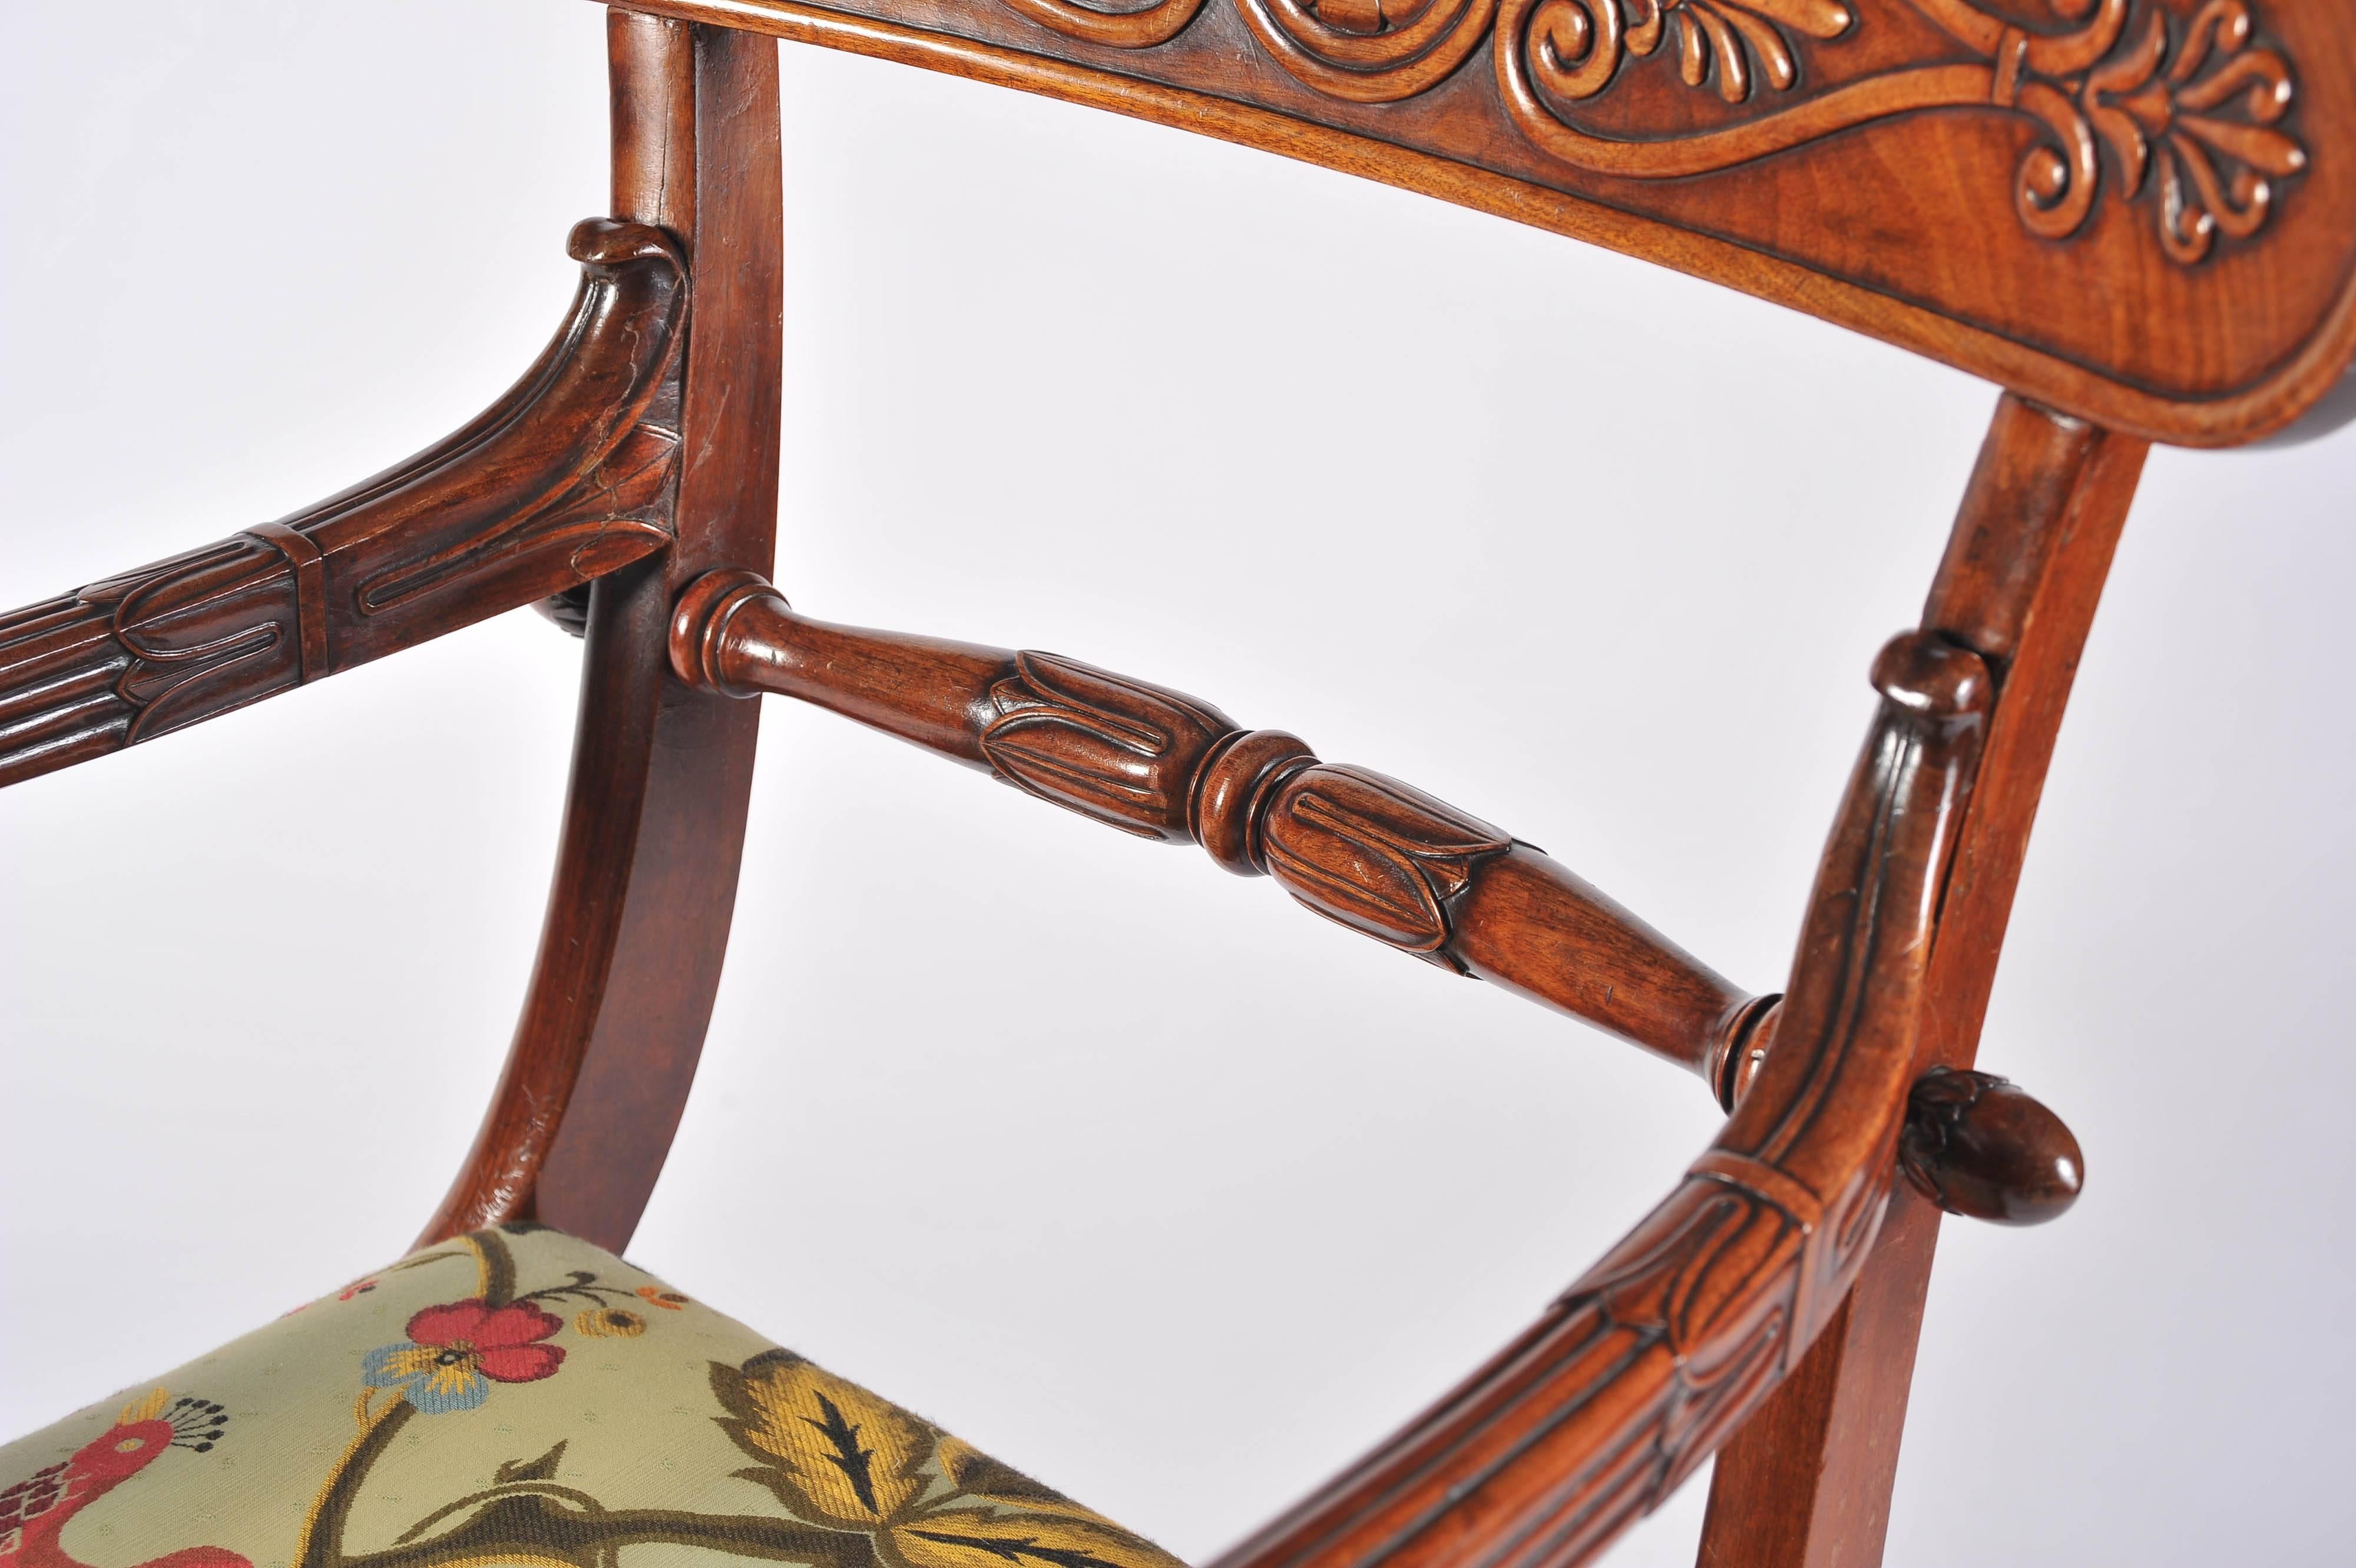 Mahogany Desk Chair, French Empire Period, Cabriole Legs, Early 19th Century For Sale 4